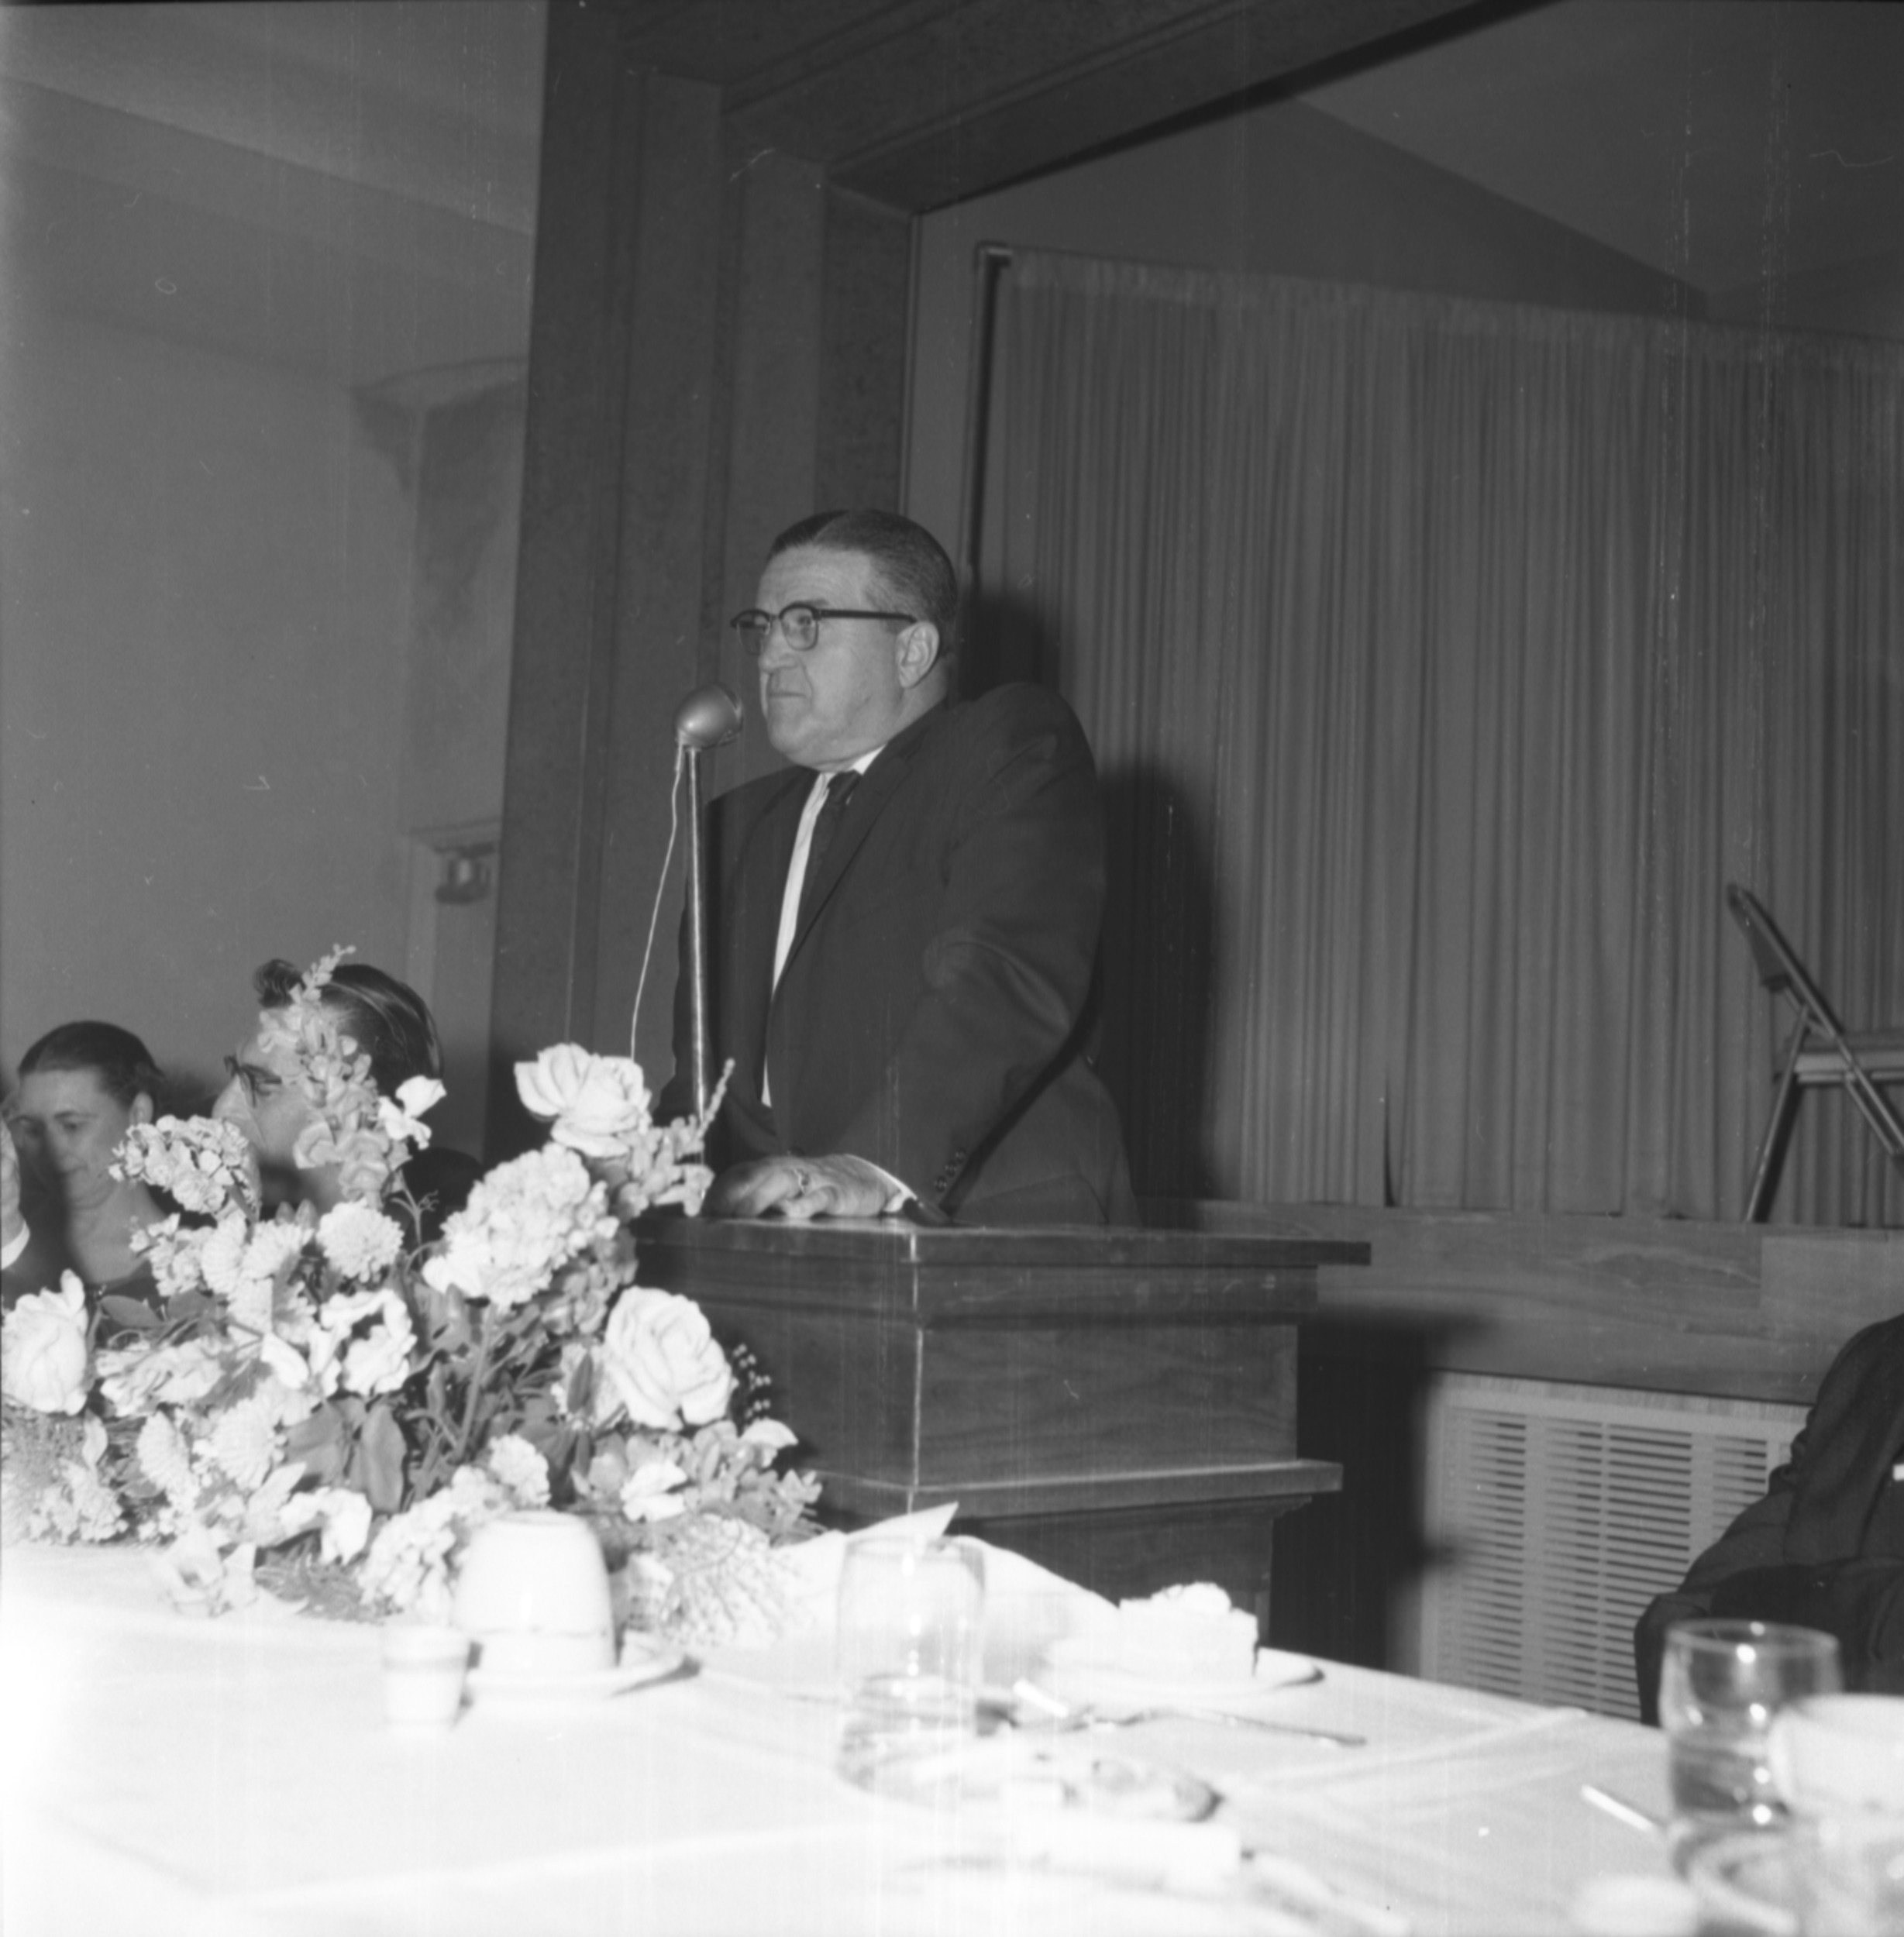 Carver House Talent Contest, May 9, 1962, Image 08